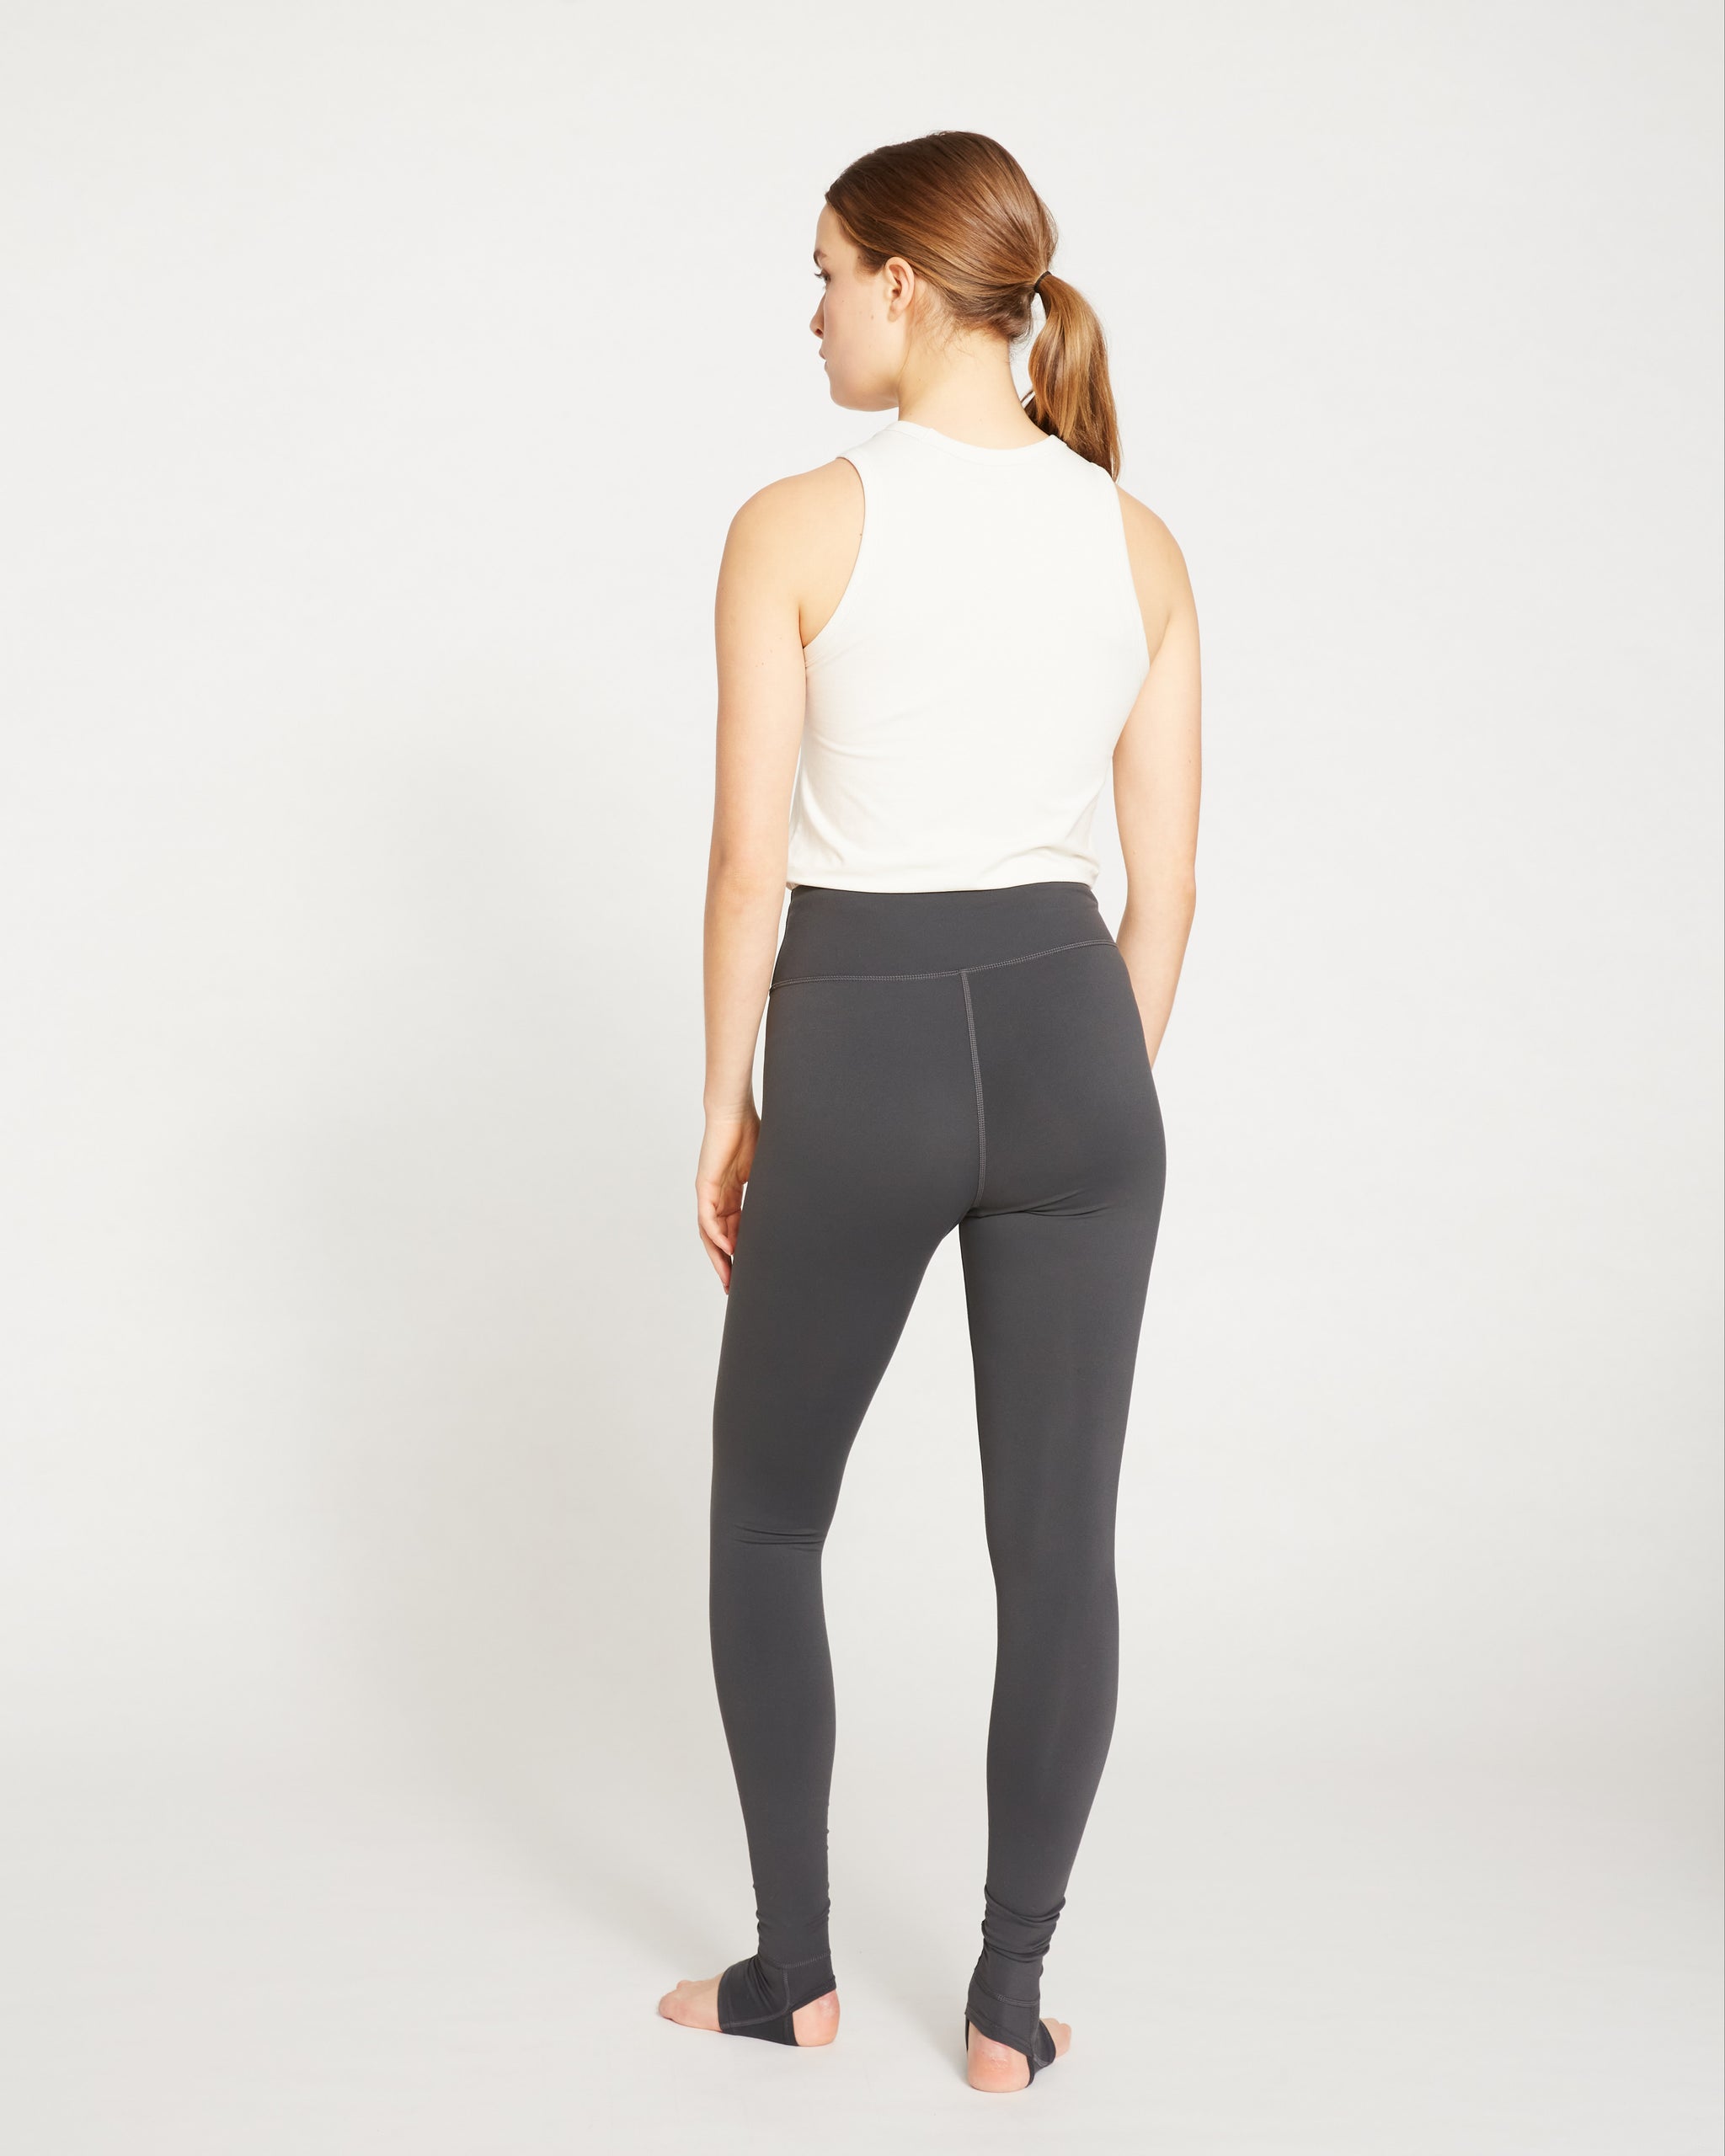 Women's Solid Cotton Spandex Jersey Stirrup Leggings - Made In USA